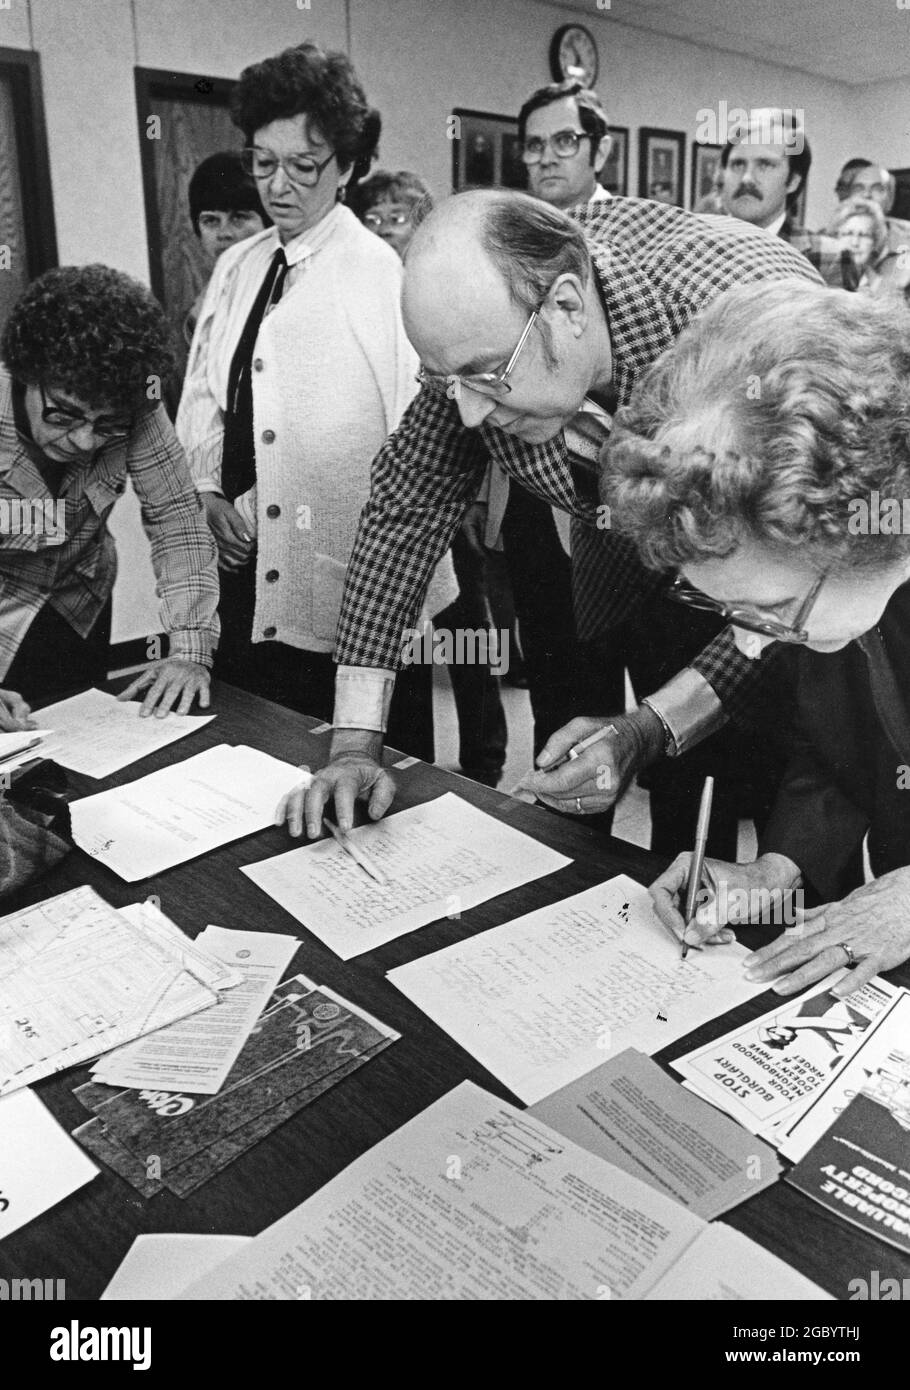 Austin, Texas USA, circa 1994: Neighborhood residents signing petitions about development as they arrive at public meeting to discuss contentious building proposal. ©Bob Daemmrich Stock Photo